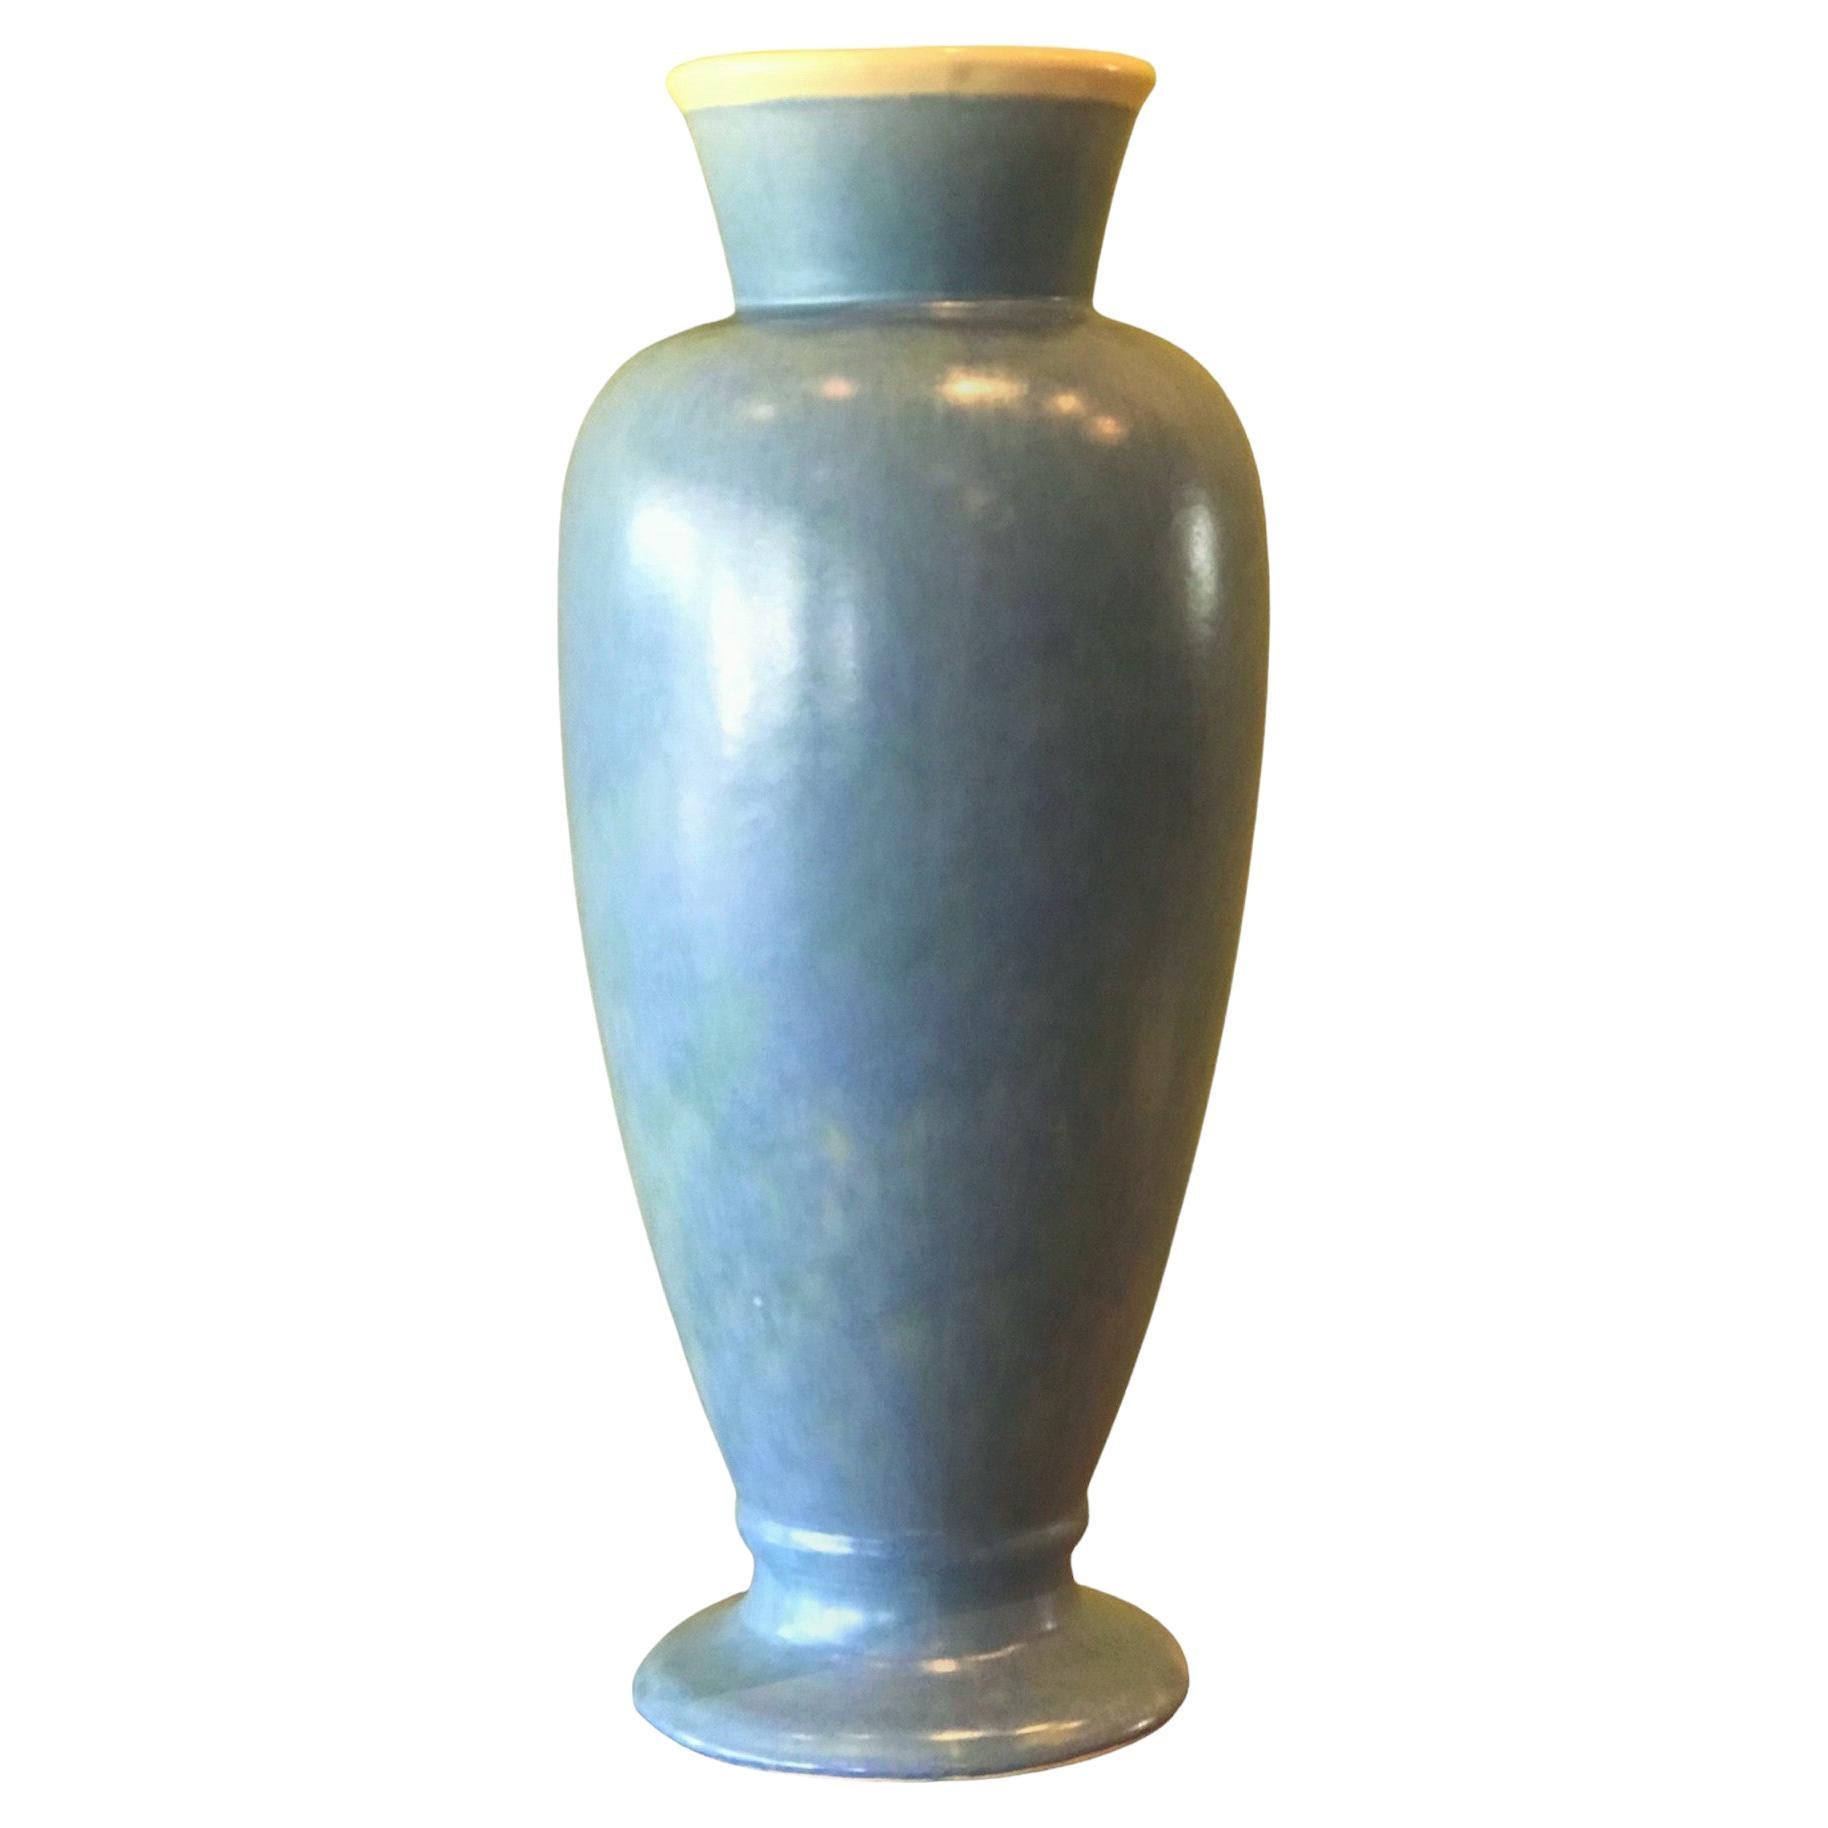 Large scale pottery vase by Weller Pottery from the 1920s with a seldom seen shape. In a Sky Blue color outside and a soft white interior. Signed with 1920s scripted Weller. In Very Good Condition.  Minor wear consistent with age and used with no